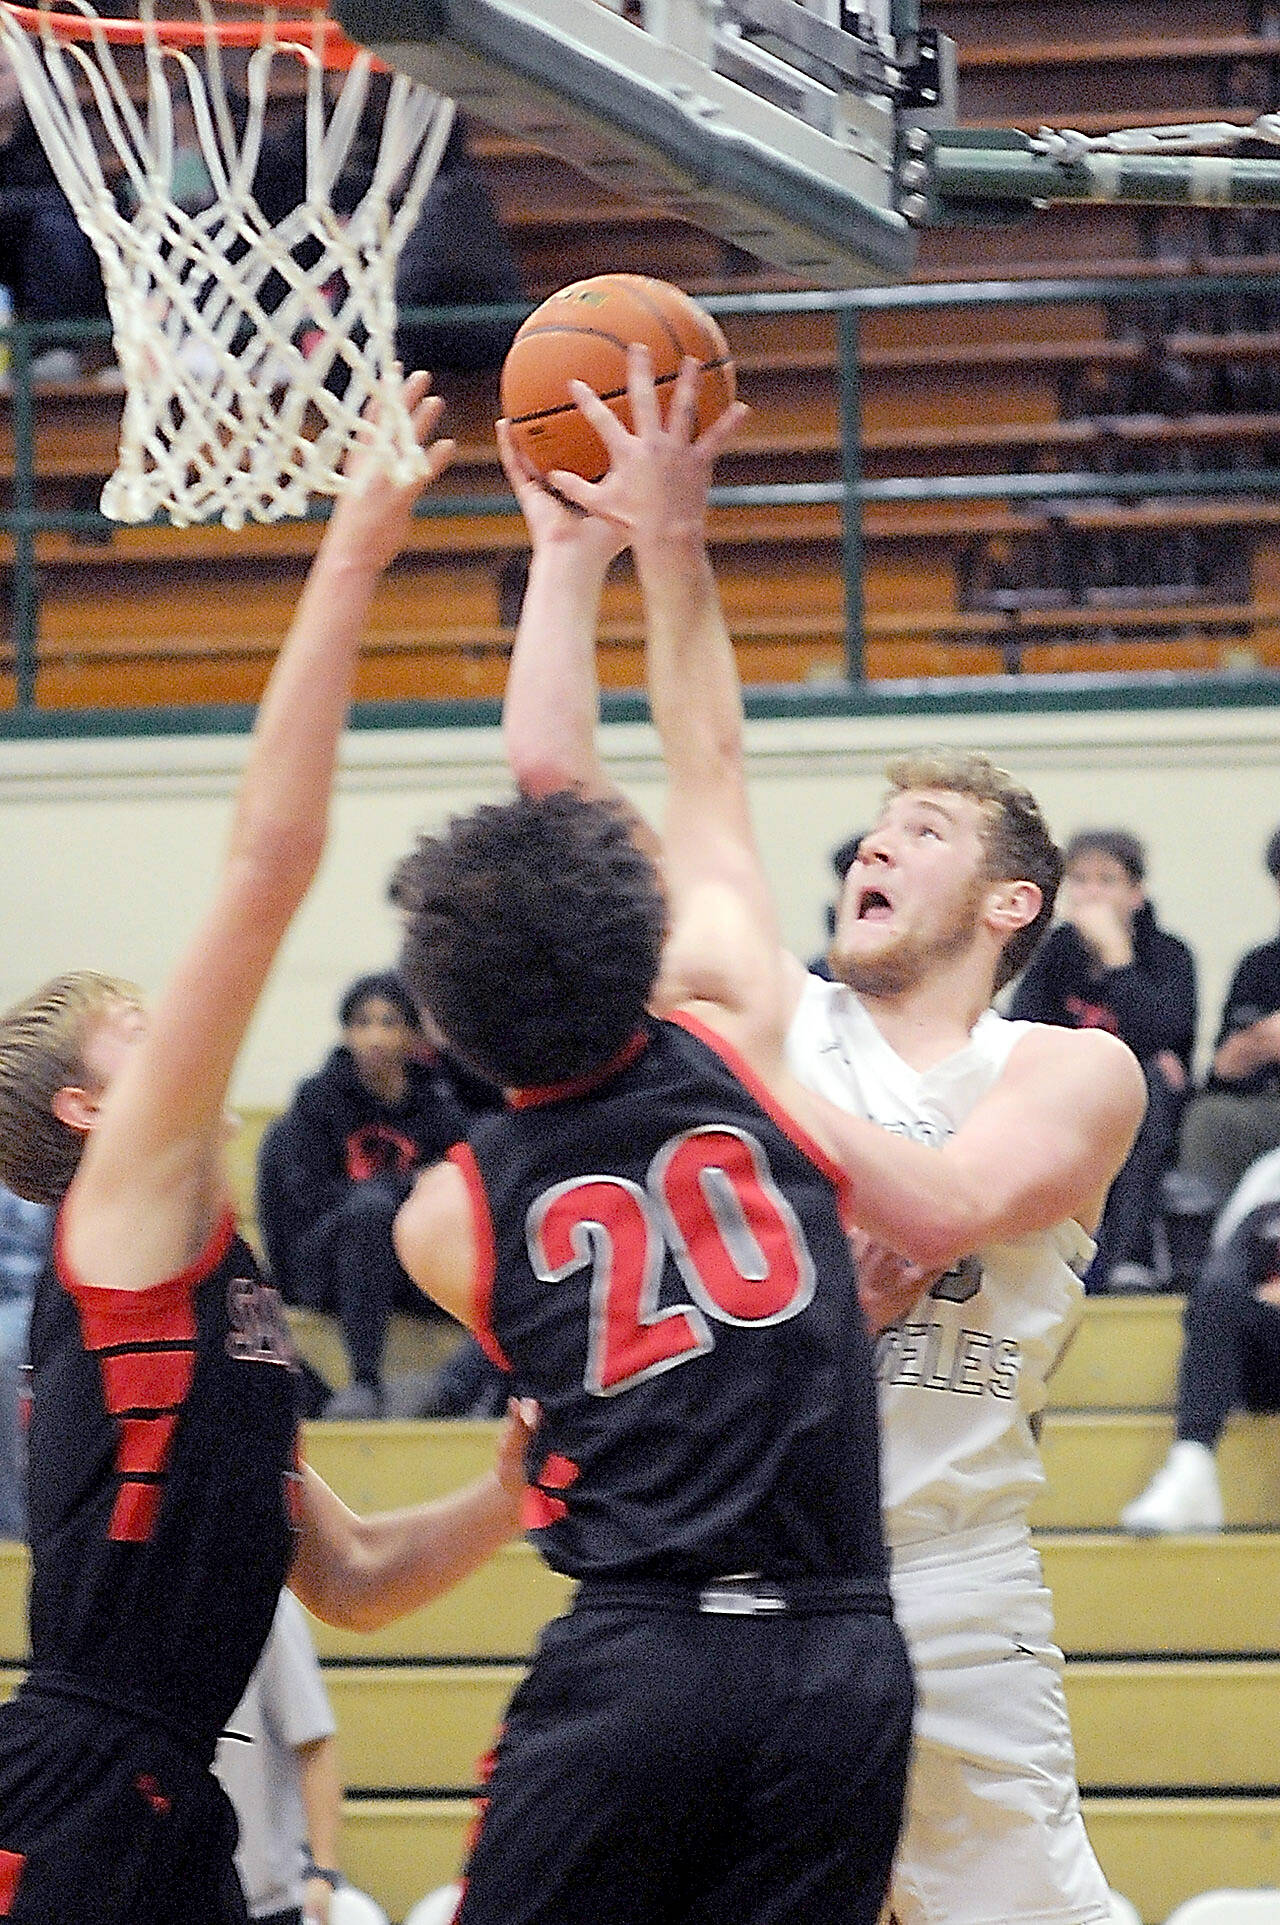 Port Angeles’ Isiah Shamp, right, pushes for the hoop over the defense of Sammamish’s Barry Morrissette, left, and Hudson Reed on Wednesday in Port Angeles. (Keith Thorpe/Peninsula Daily News)